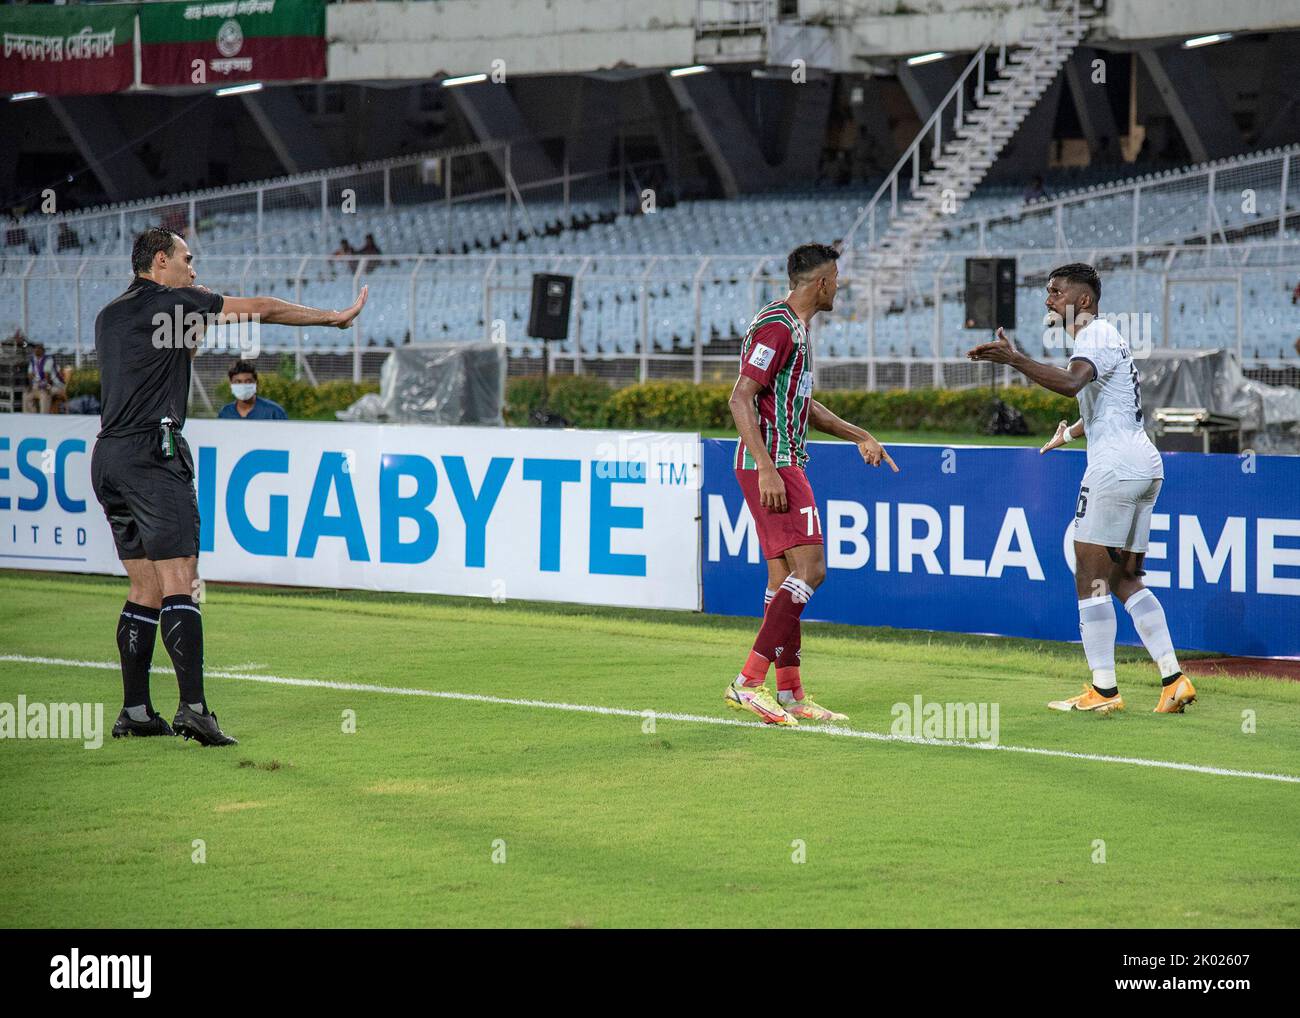 Kolkata, India. 07th Sep, 2022. ATKMB (Mohunbagan Football Club) of Kolkata, India loses to KL City FC (Kuala Lumpur City Football Club) of Kuala lumper, Malaysia by 1-3 margin on AFC Cup-2022 Inter-Zonal Semifinal at VYBK, SALT LAKE STADIUM, Kolkata, India on 7th Sep, 2022. Paulo Josue (60'), Fakrul Aiman Sidid (92') and Romel Morales (95') scored the goals for the visitors while Fardin Ali Molla (90') netted the solitary goal for the Indian Super League club. (Photo by Amlan Biswas/Pacific Press) Credit: Pacific Press Media Production Corp./Alamy Live News Stock Photo